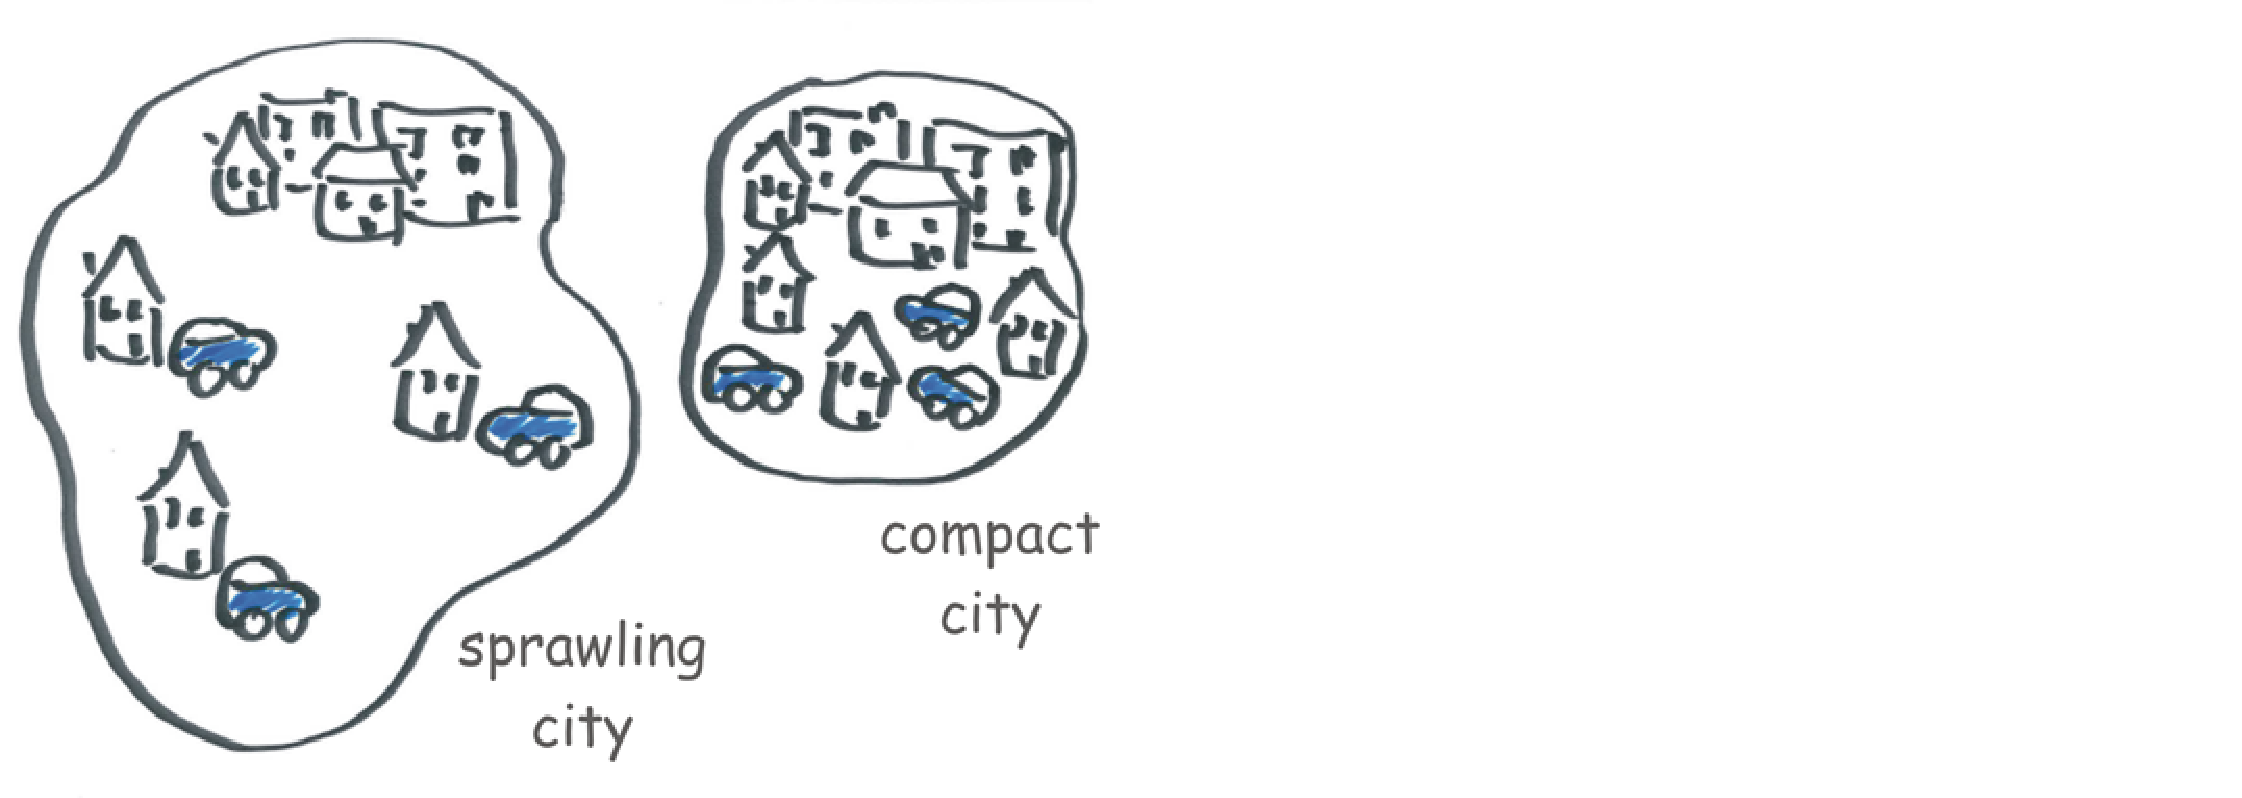 Figure 6. Comparison of a sprawling city and a compact city.